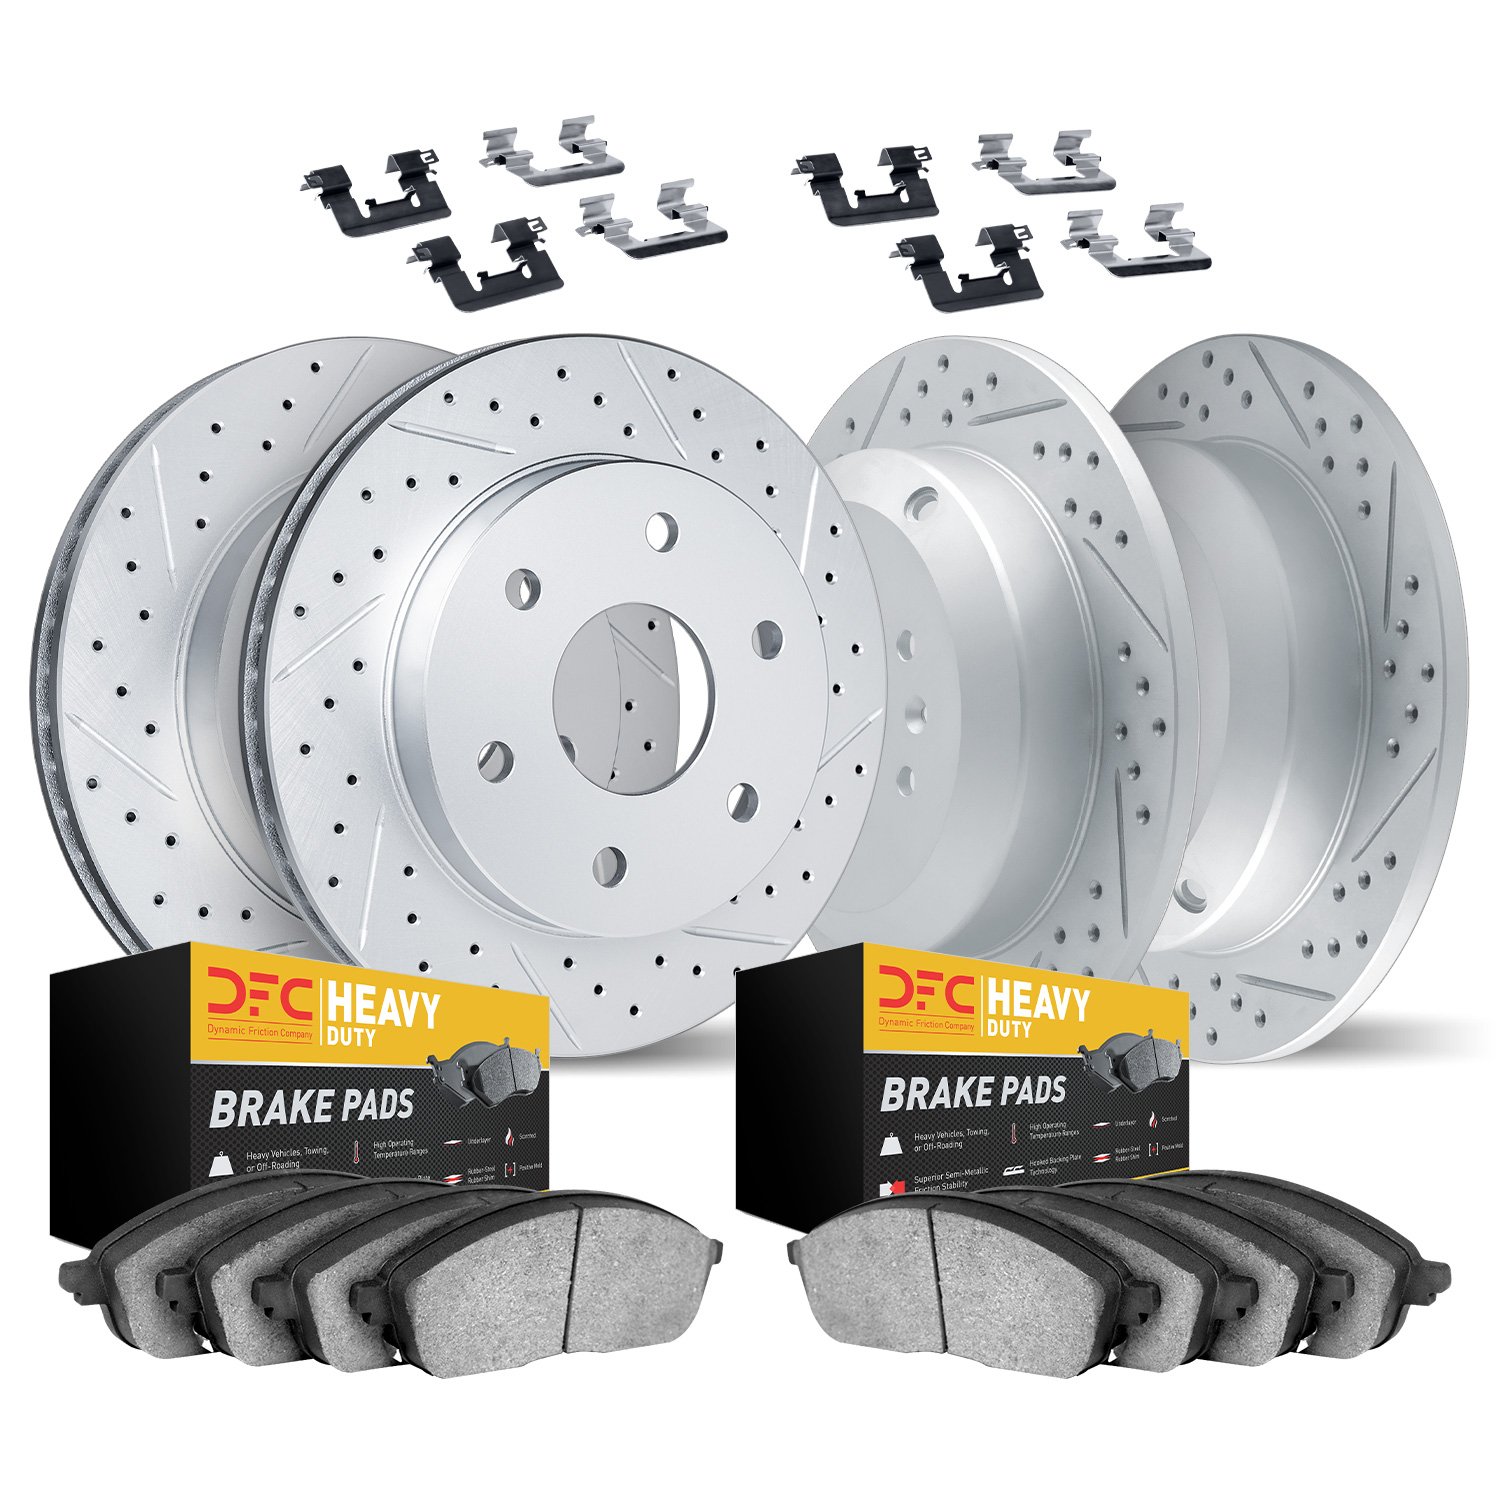 2214-40057 Geoperformance Drilled/Slotted Rotors w/Heavy-Duty Pads Kit & Hardware, Fits Select Multiple Makes/Models, Position: